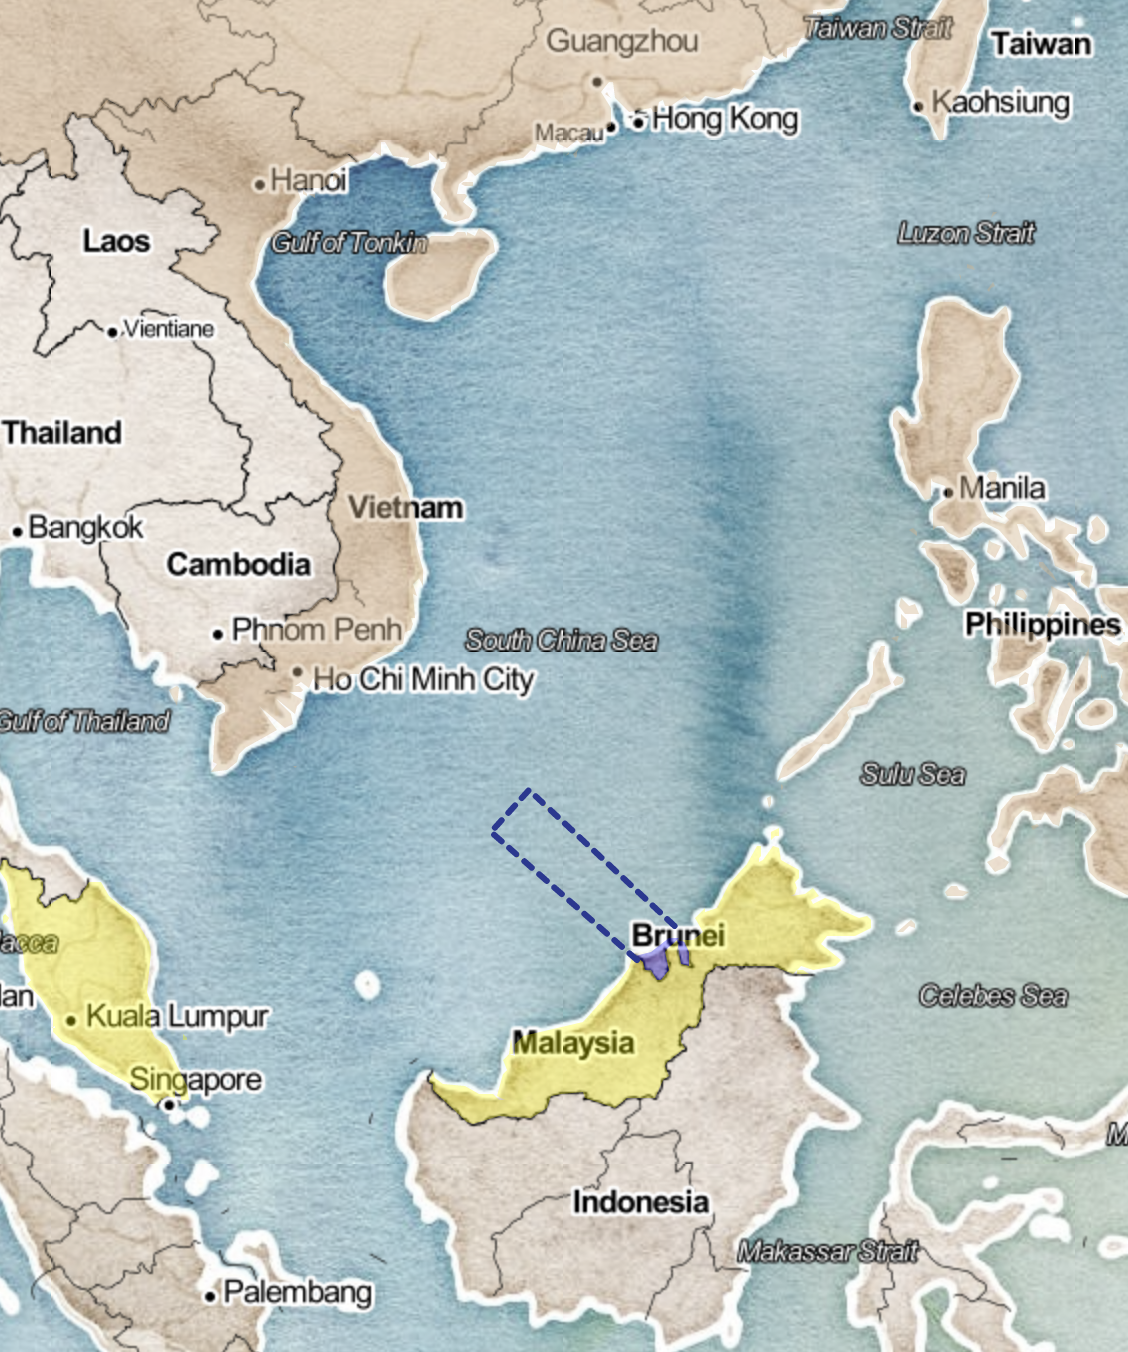 Map of Brunei's claims in the South China Sea